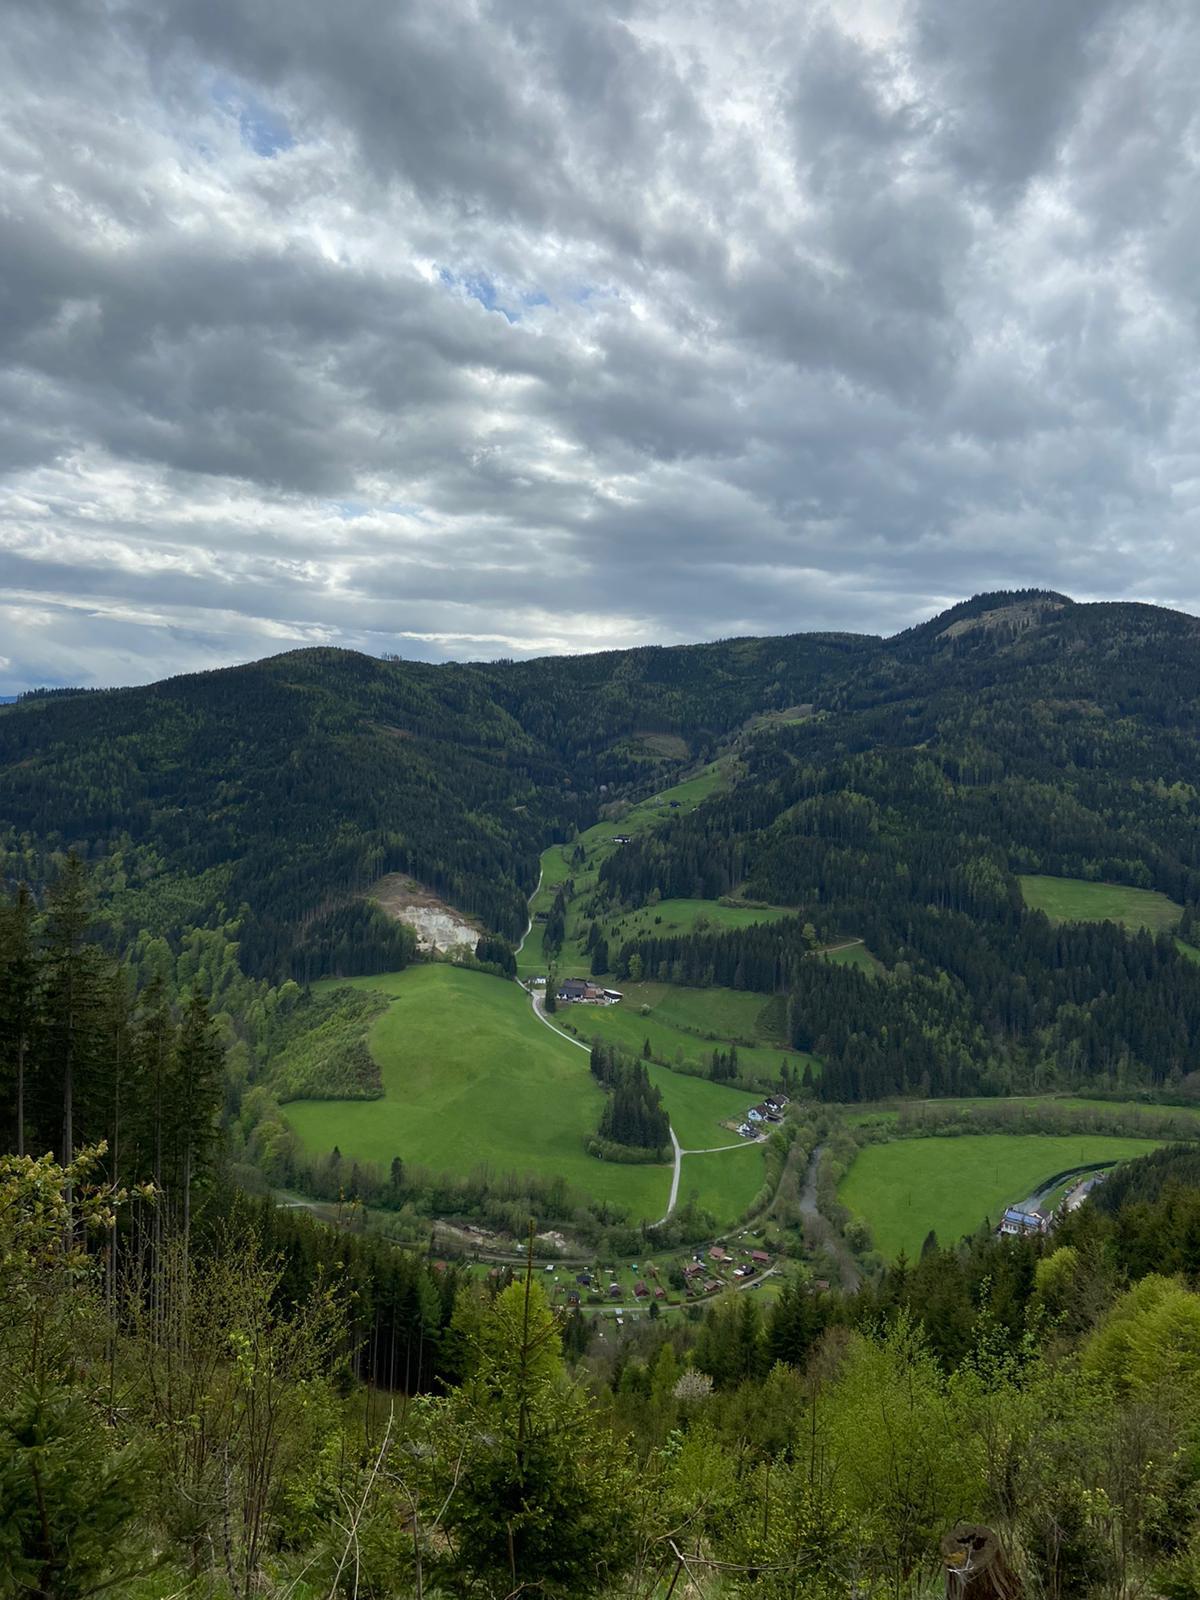 Hiking Austria, Murzzuschlag - My, Austria, Hike, Travels, Europe, Forest, Mobile photography, May, 2021, Longpost